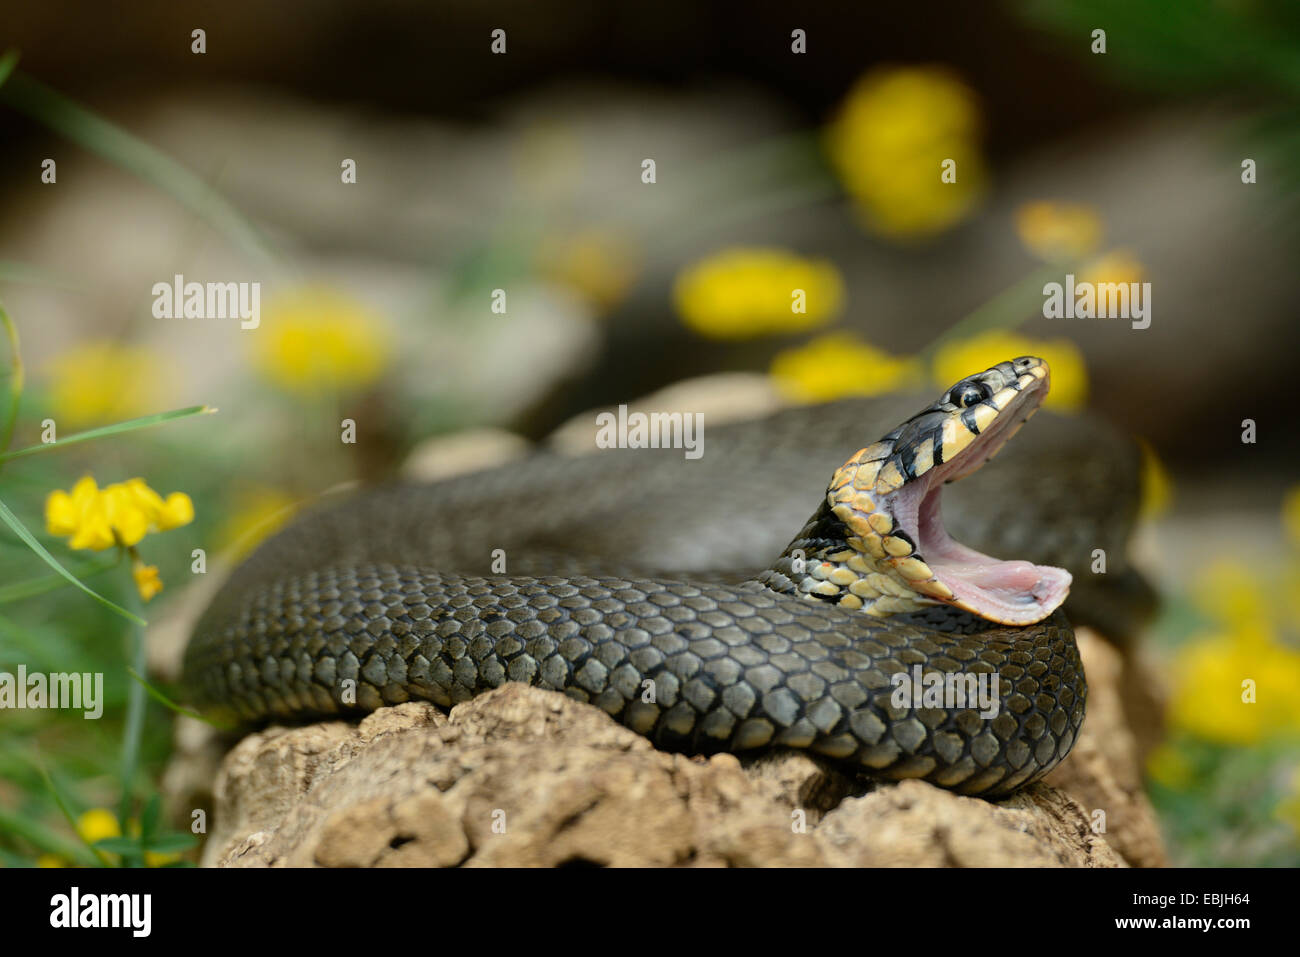 grass snake (Natrix natrix), with mouth wide open, side view, Germany Stock Photo